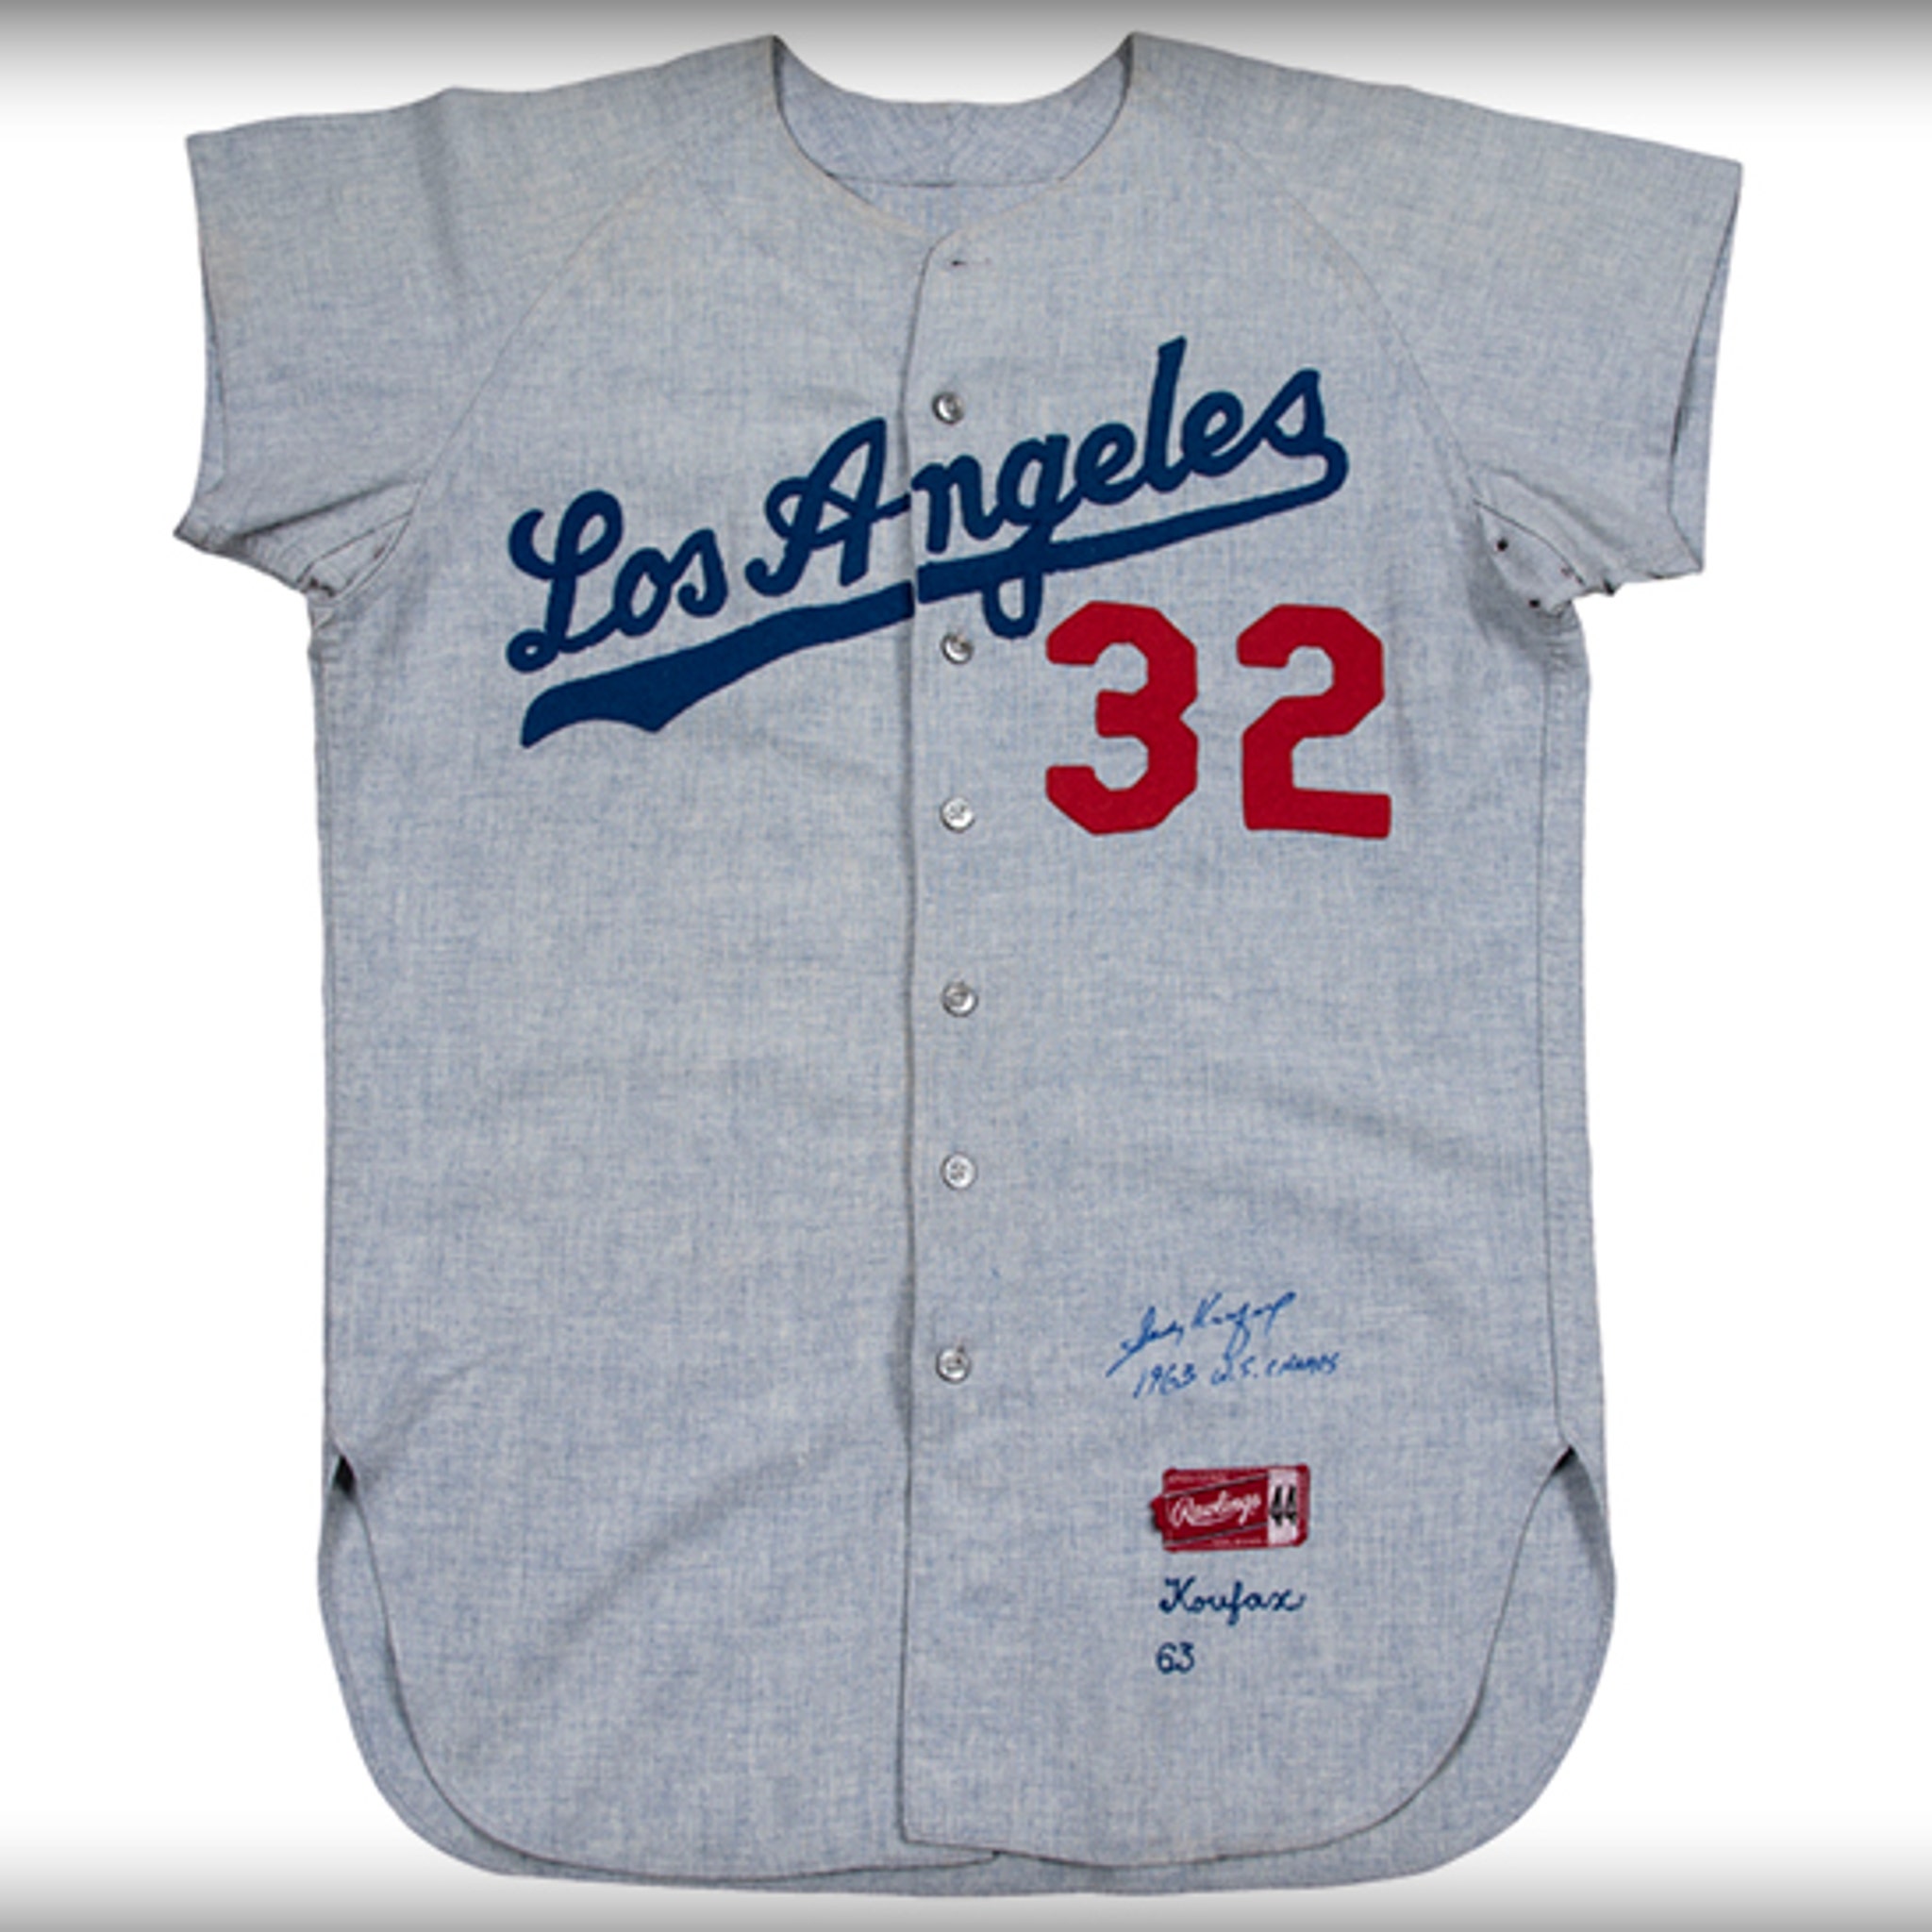 Sandy Koufax's 1963 Game-Worn Jersey Sells For $429,000!